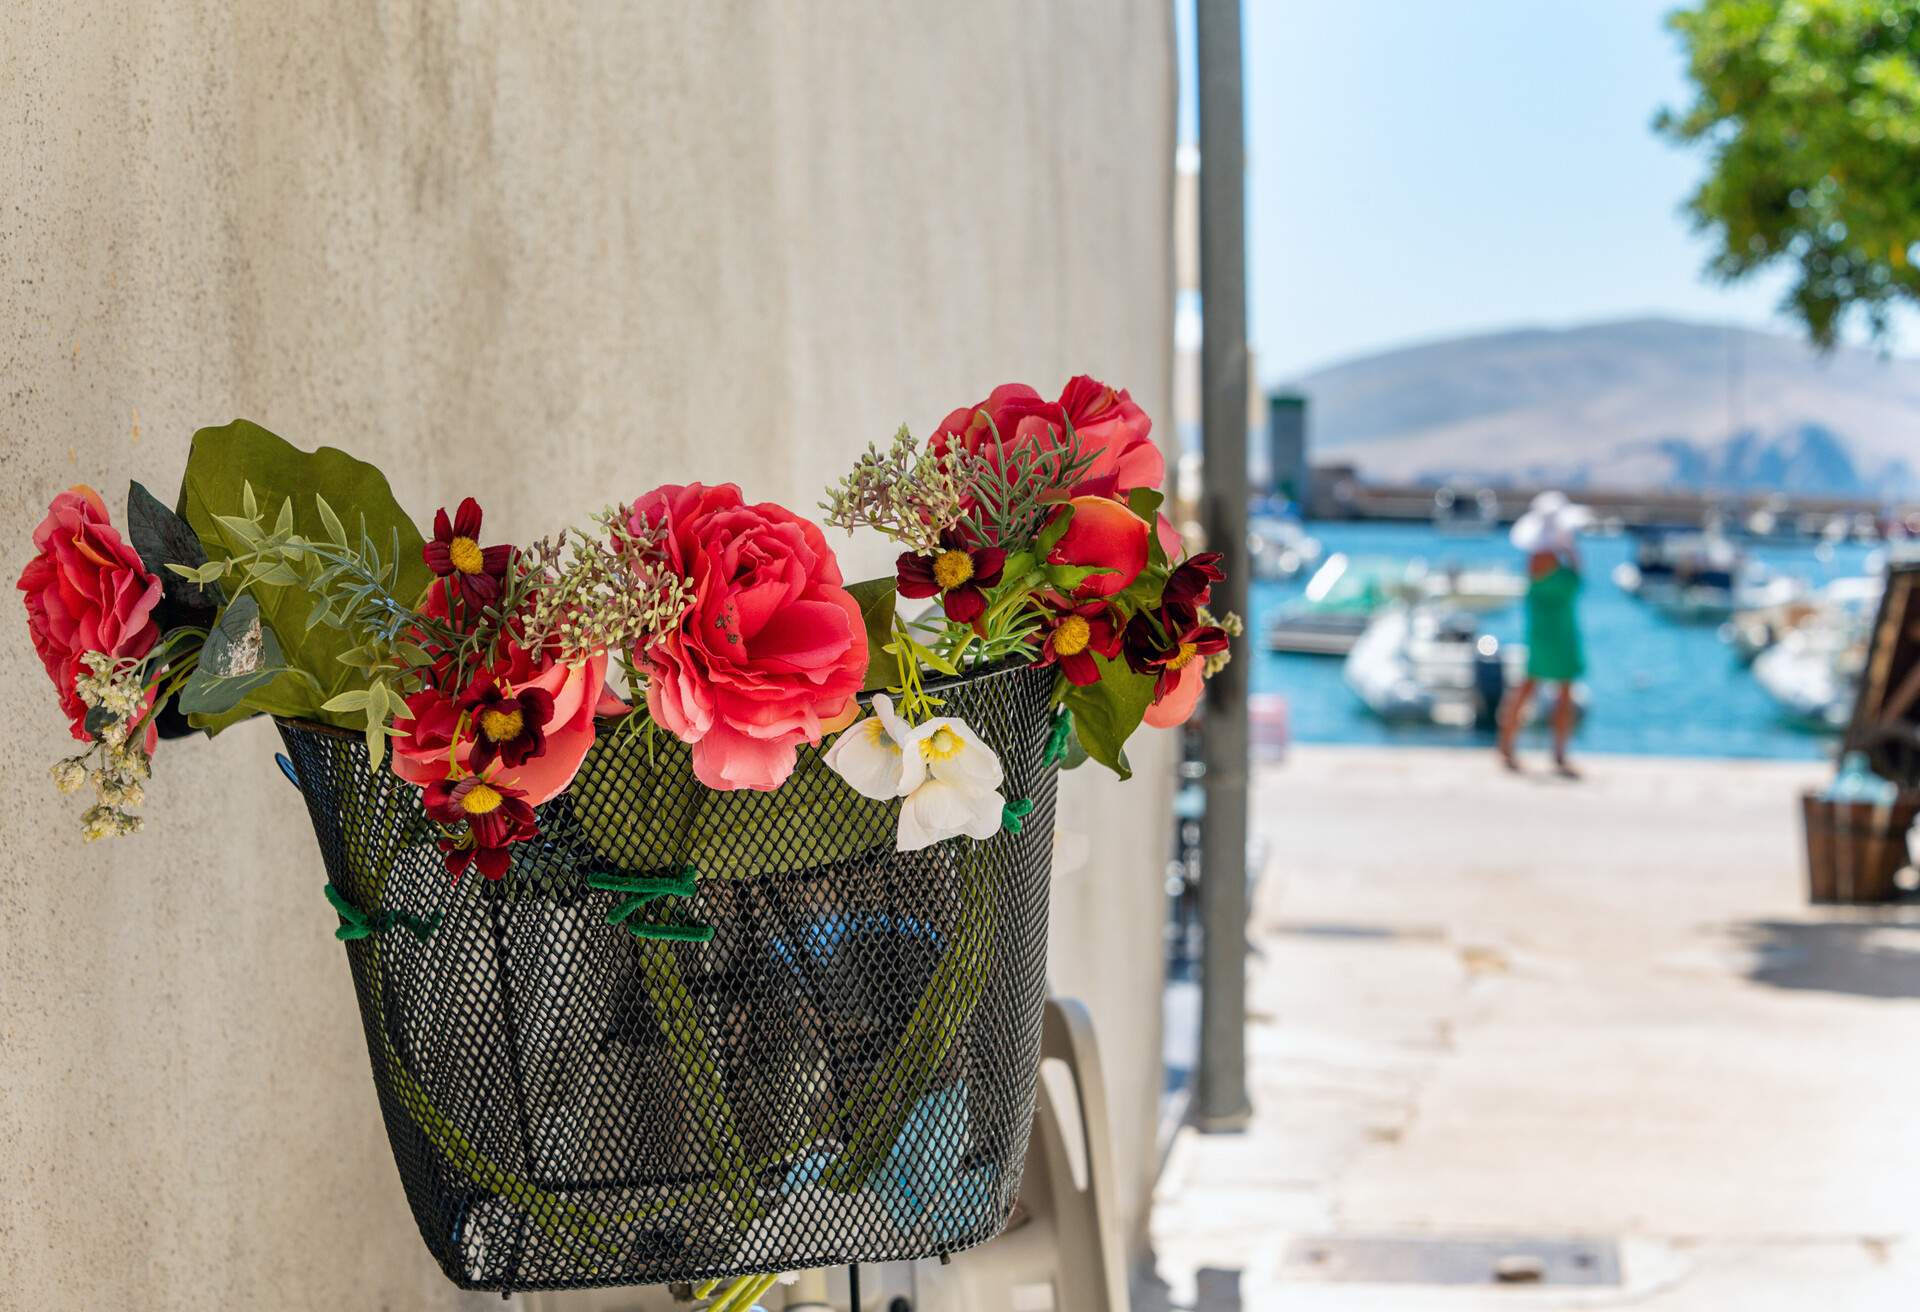 Baska old town streets decorated with flowers at summer. A women's silhouette passes by in background. Krk island, Croatia, Europe